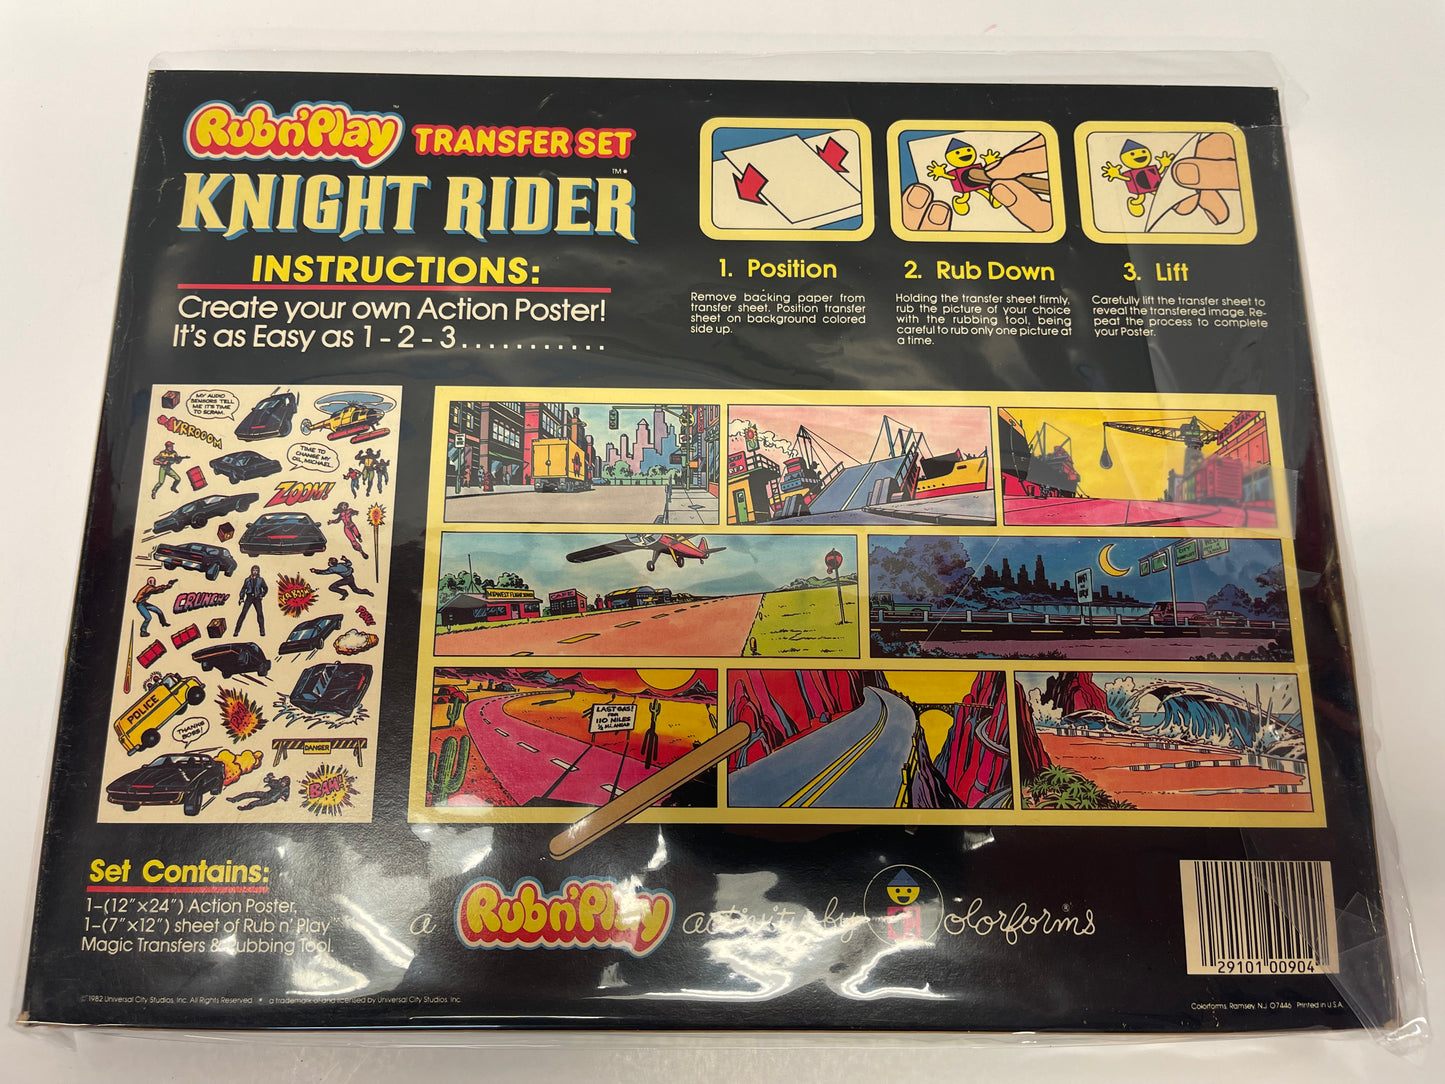 Knight Rider Rub n Play Transfer Set by Colorforms Sealed from 1982!